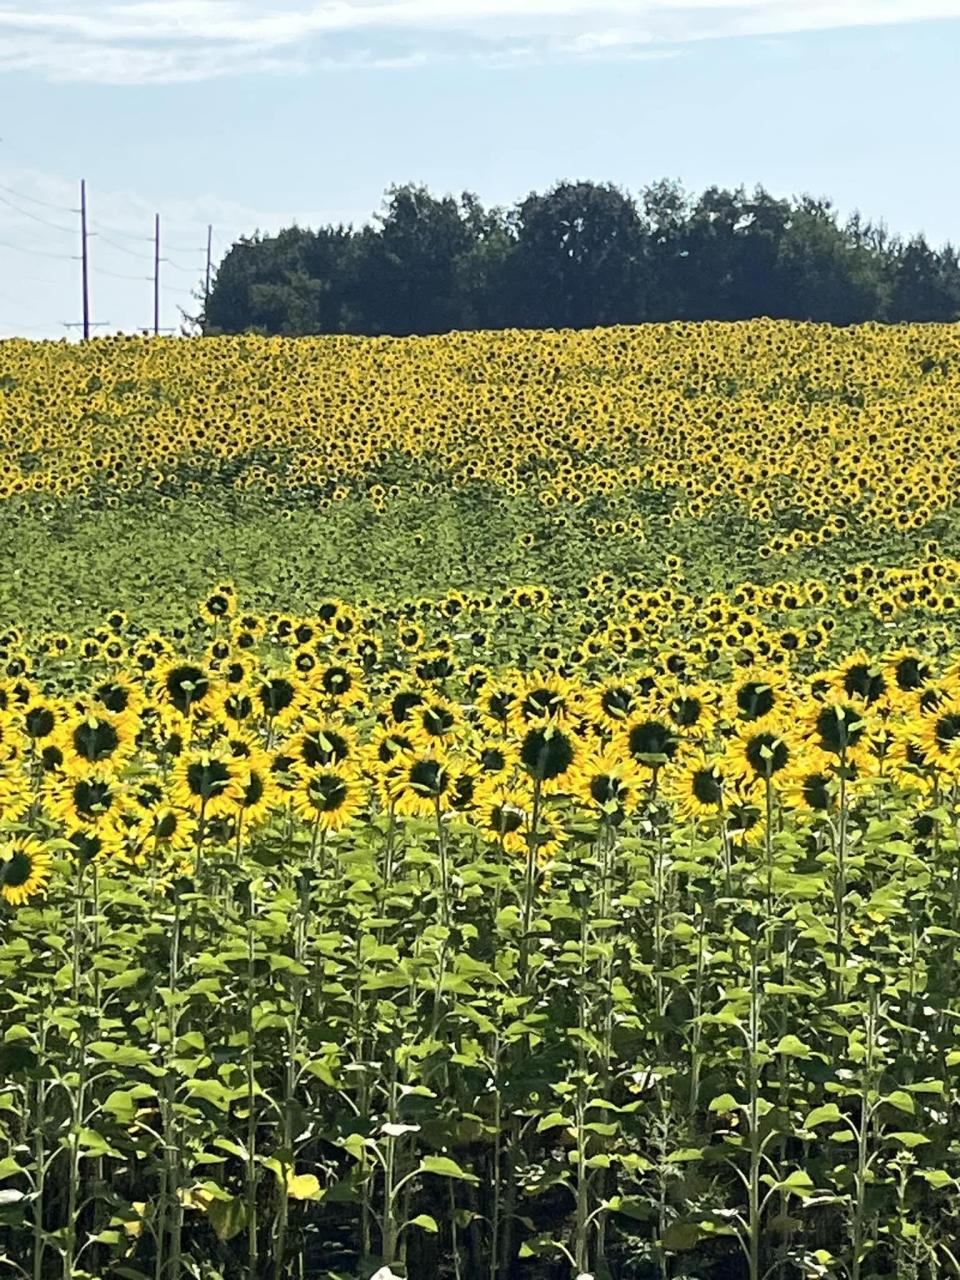 Sunflower fields are becoming a familiar site in Ohio. Sunflowers can be profitable for farmers because of their many uses, from edible oil and seeds to feed for livestock.